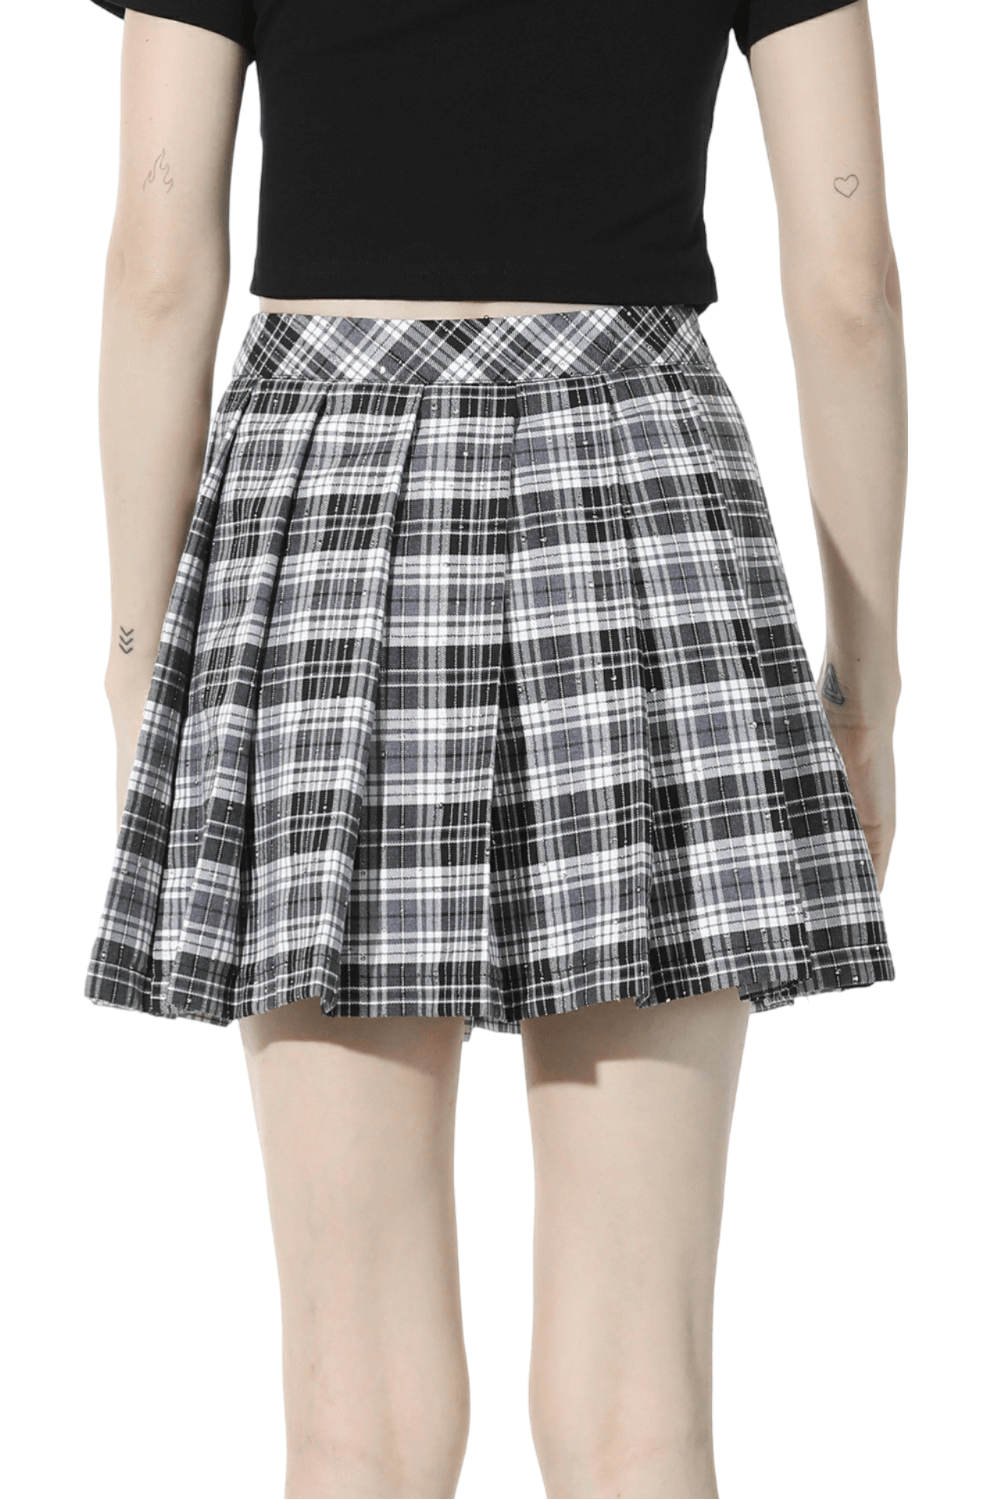 Pleated Gothic Mini Skirt with Black and White Plaid